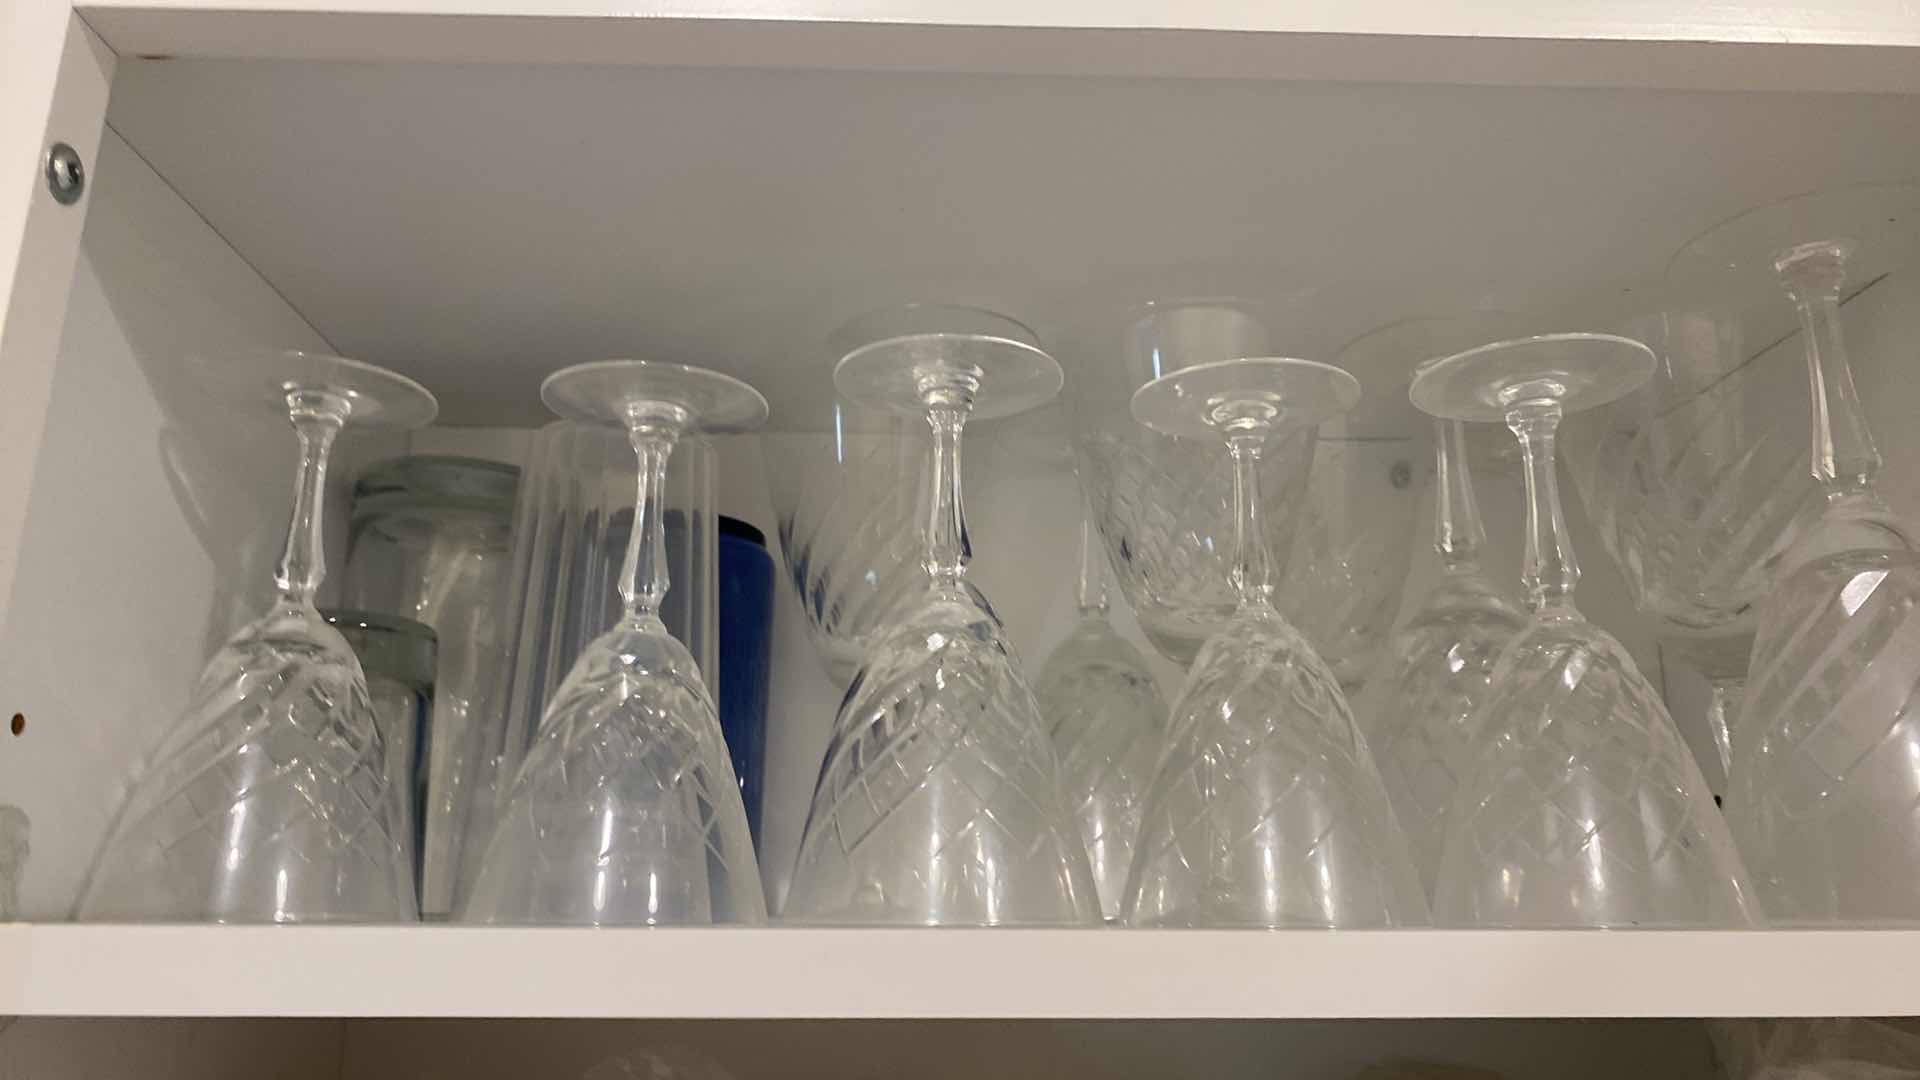 Photo 4 of 3 SHELVES IN BUTLER PANTRY GLASSES AND ICE CREAL BOWLS